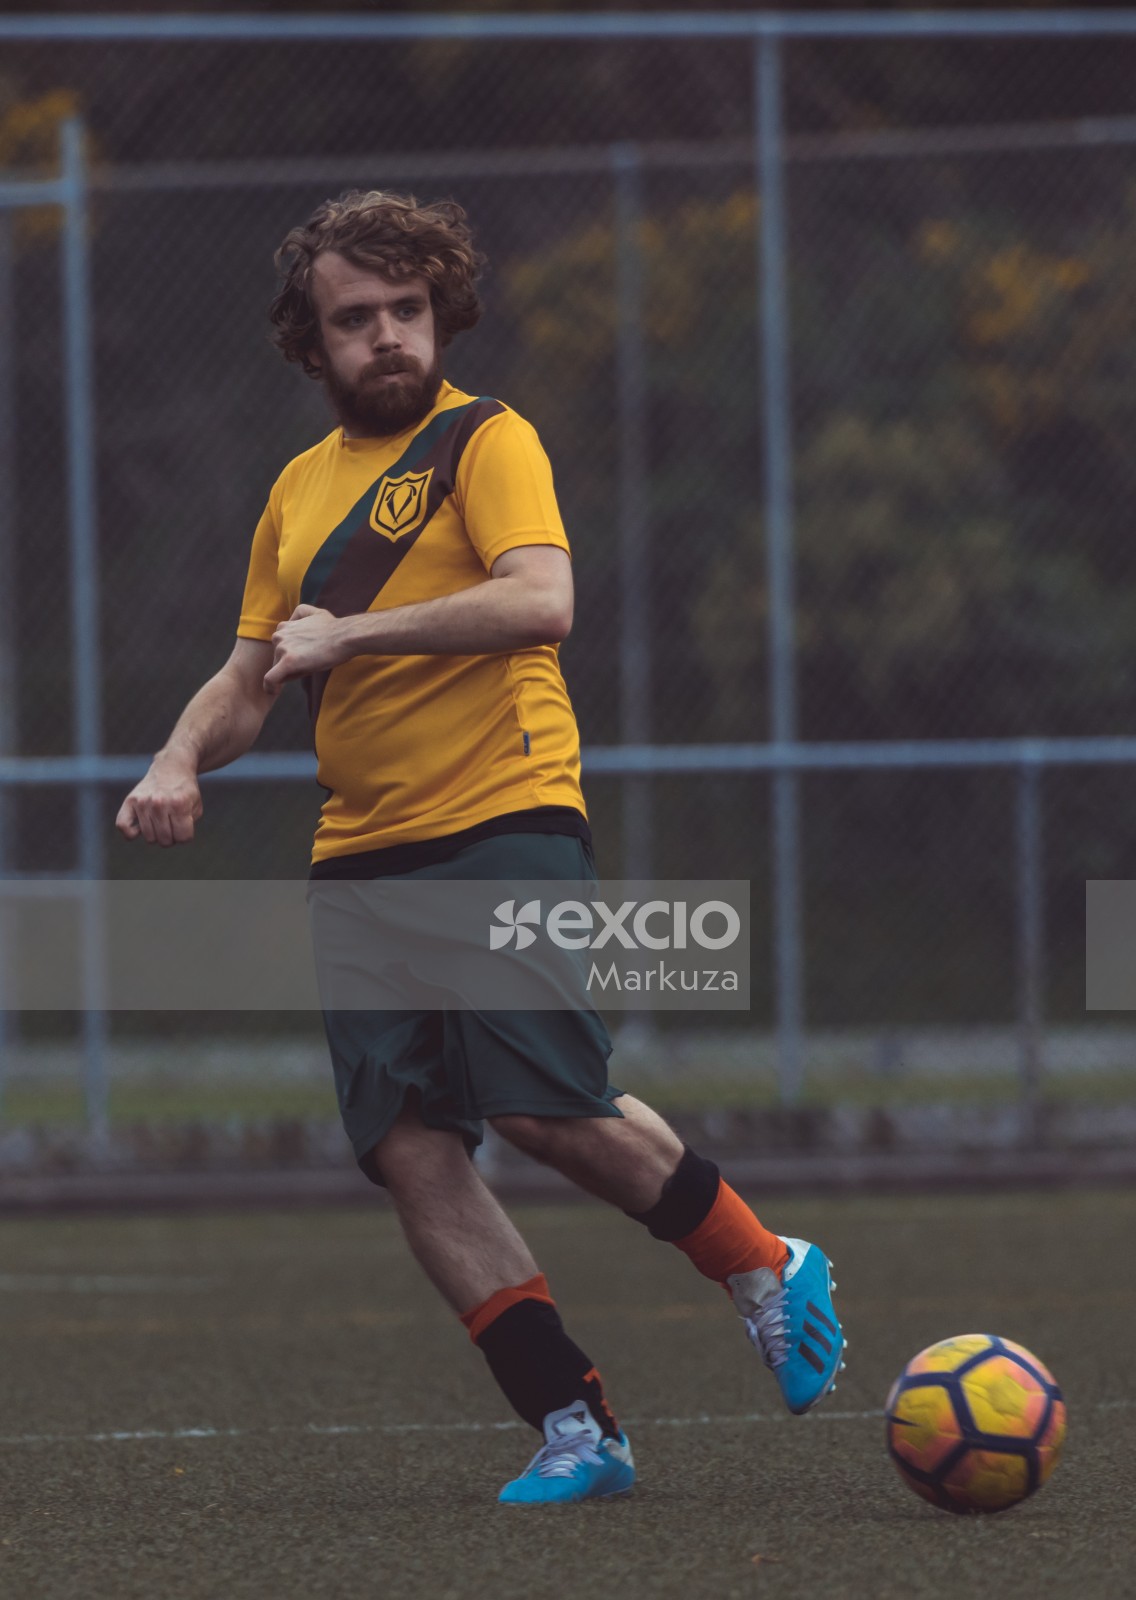 Football player with curly hair wearing yellow shirt - Sports Zone sunday league